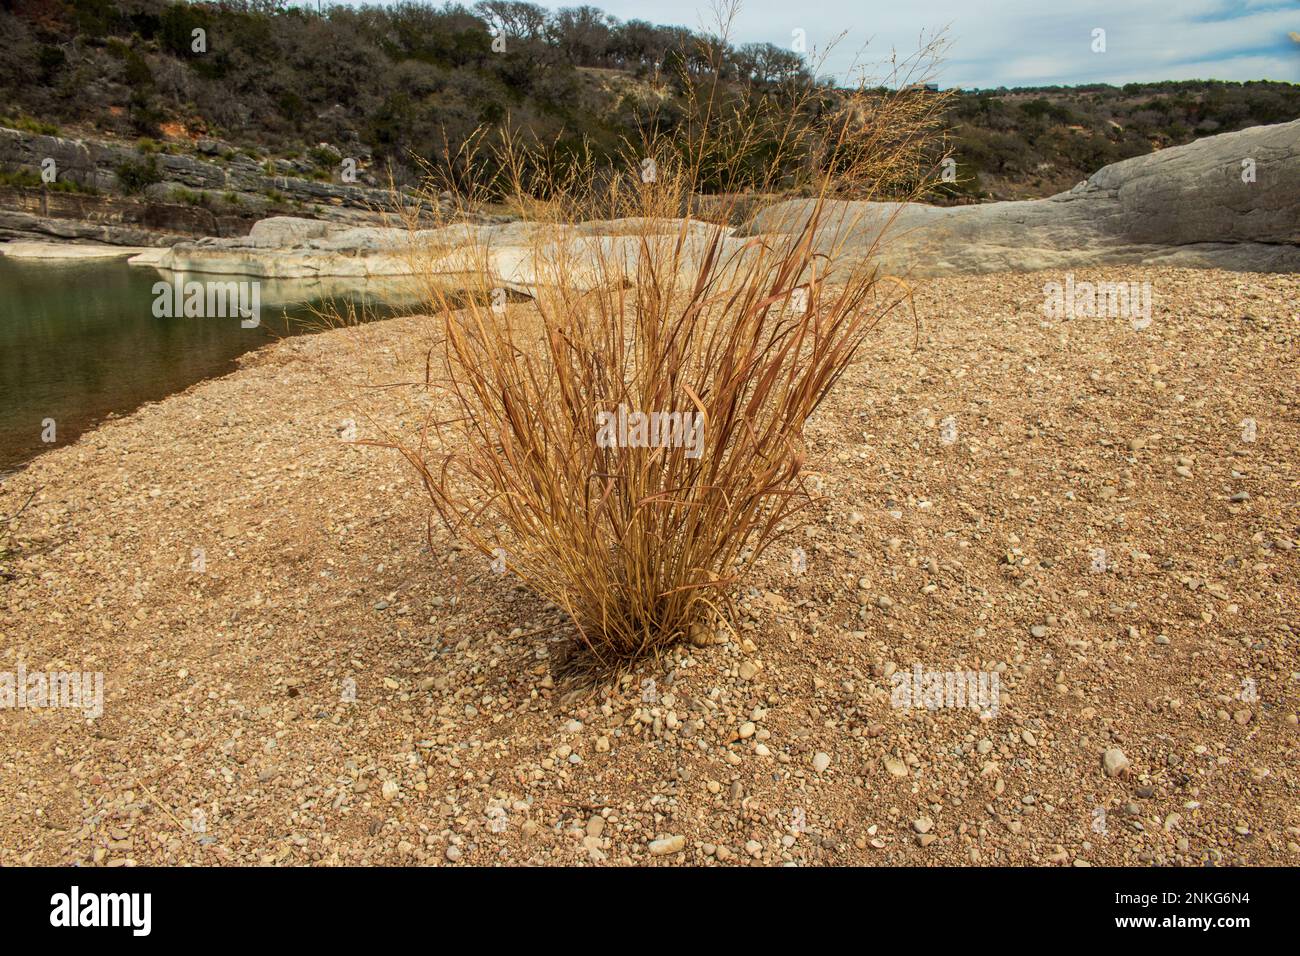 A Little Bluestem, Schizachyrium, sprouts from the gravel shale riverbed in Pedernales Falls State Park as part of the Texas Hill Country Stock Photo